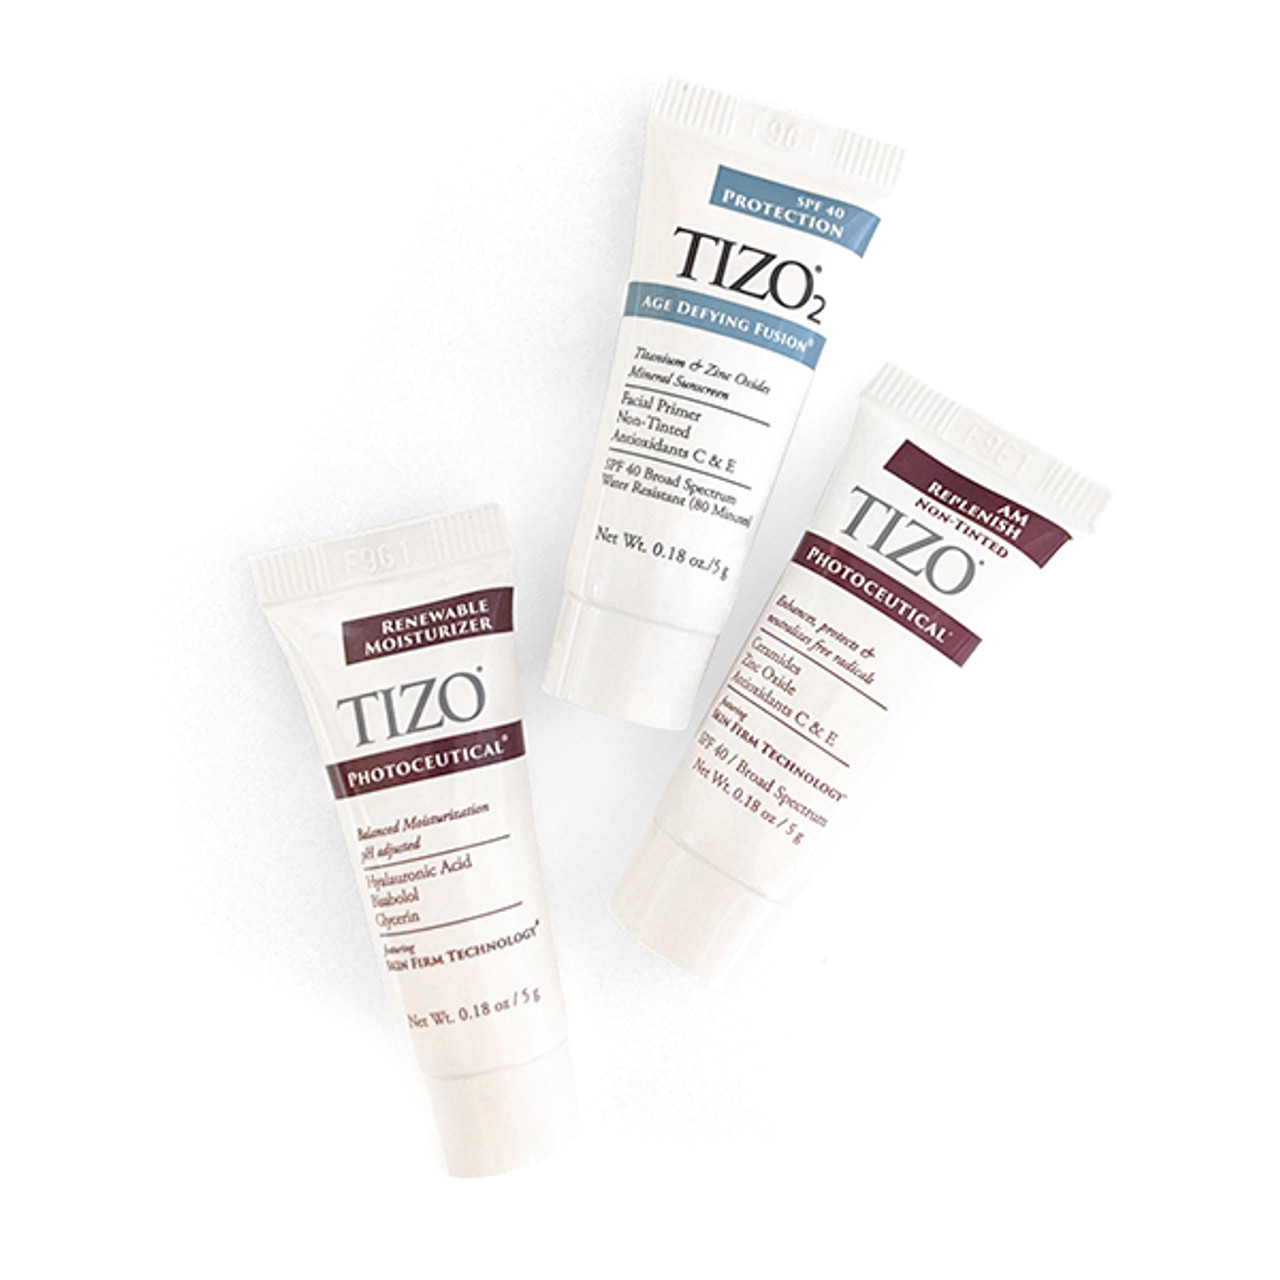 TIZO Free Samples - Limit One Package per Order